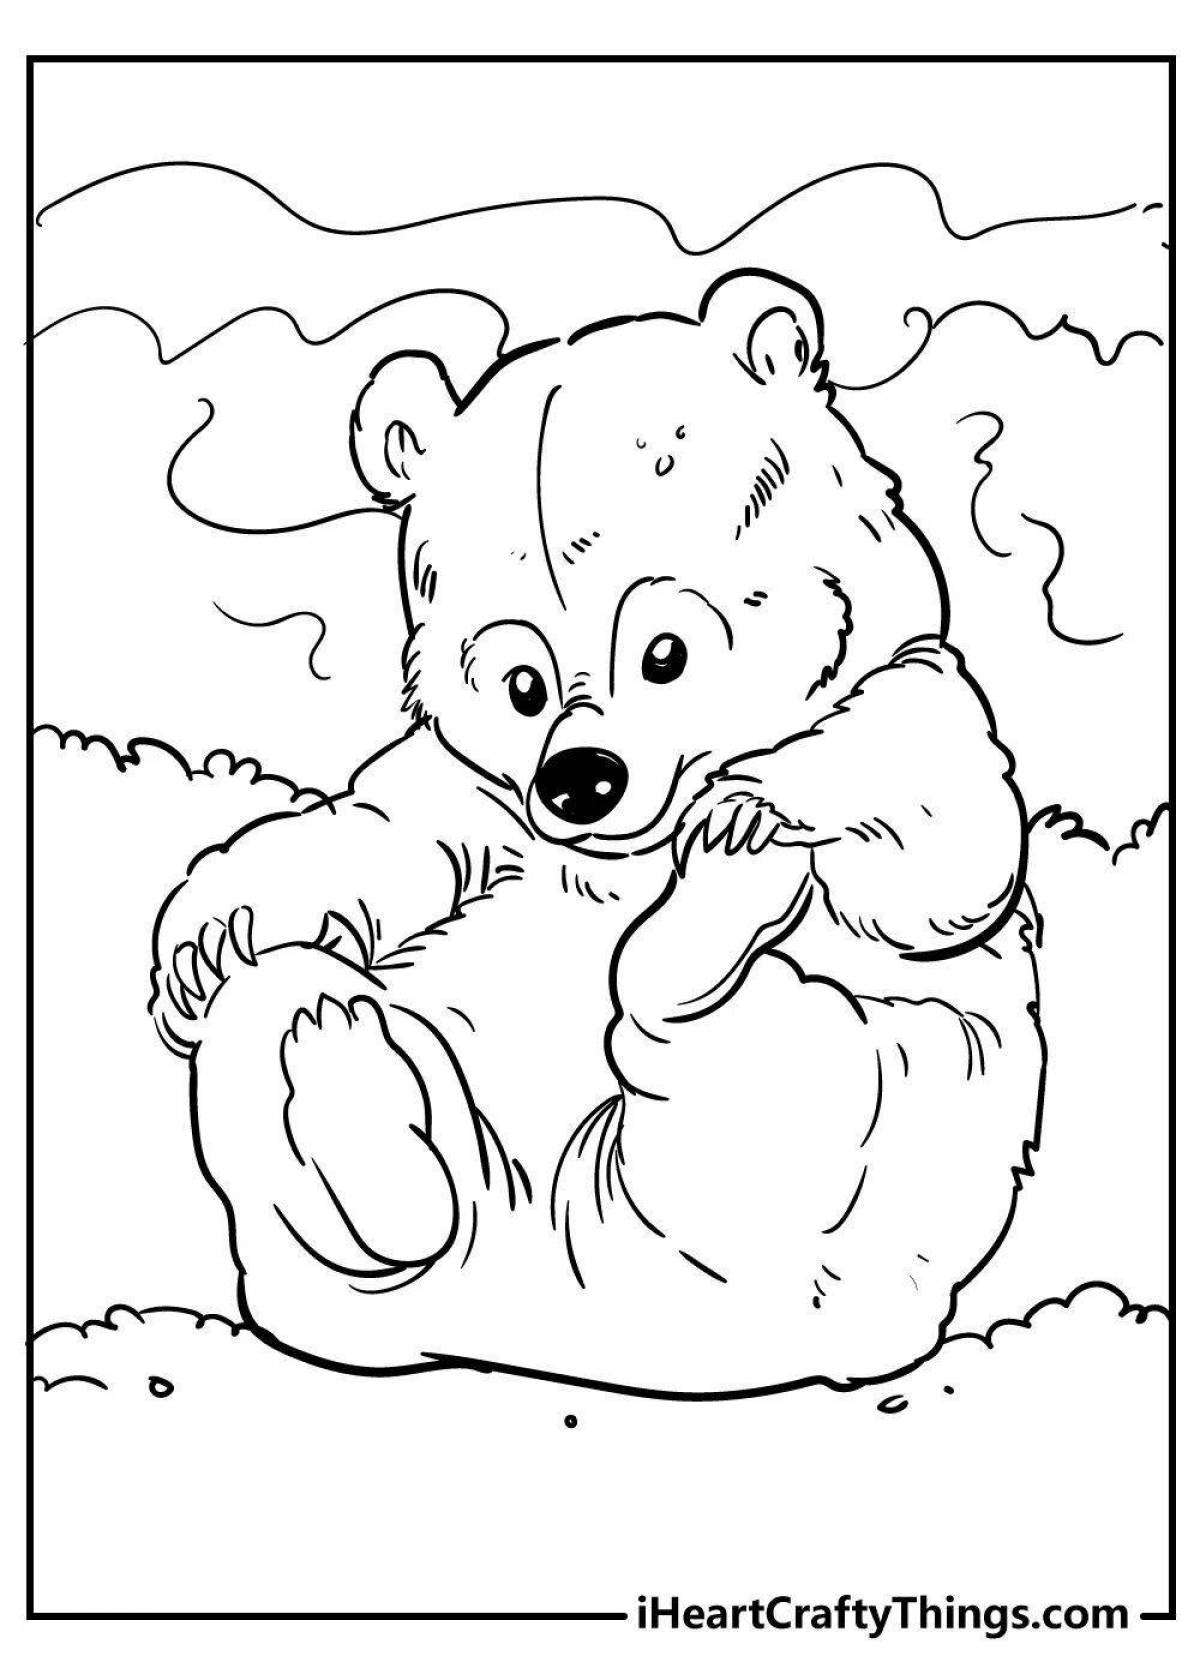 Adorable teddy bear coloring book for children 4-5 years old